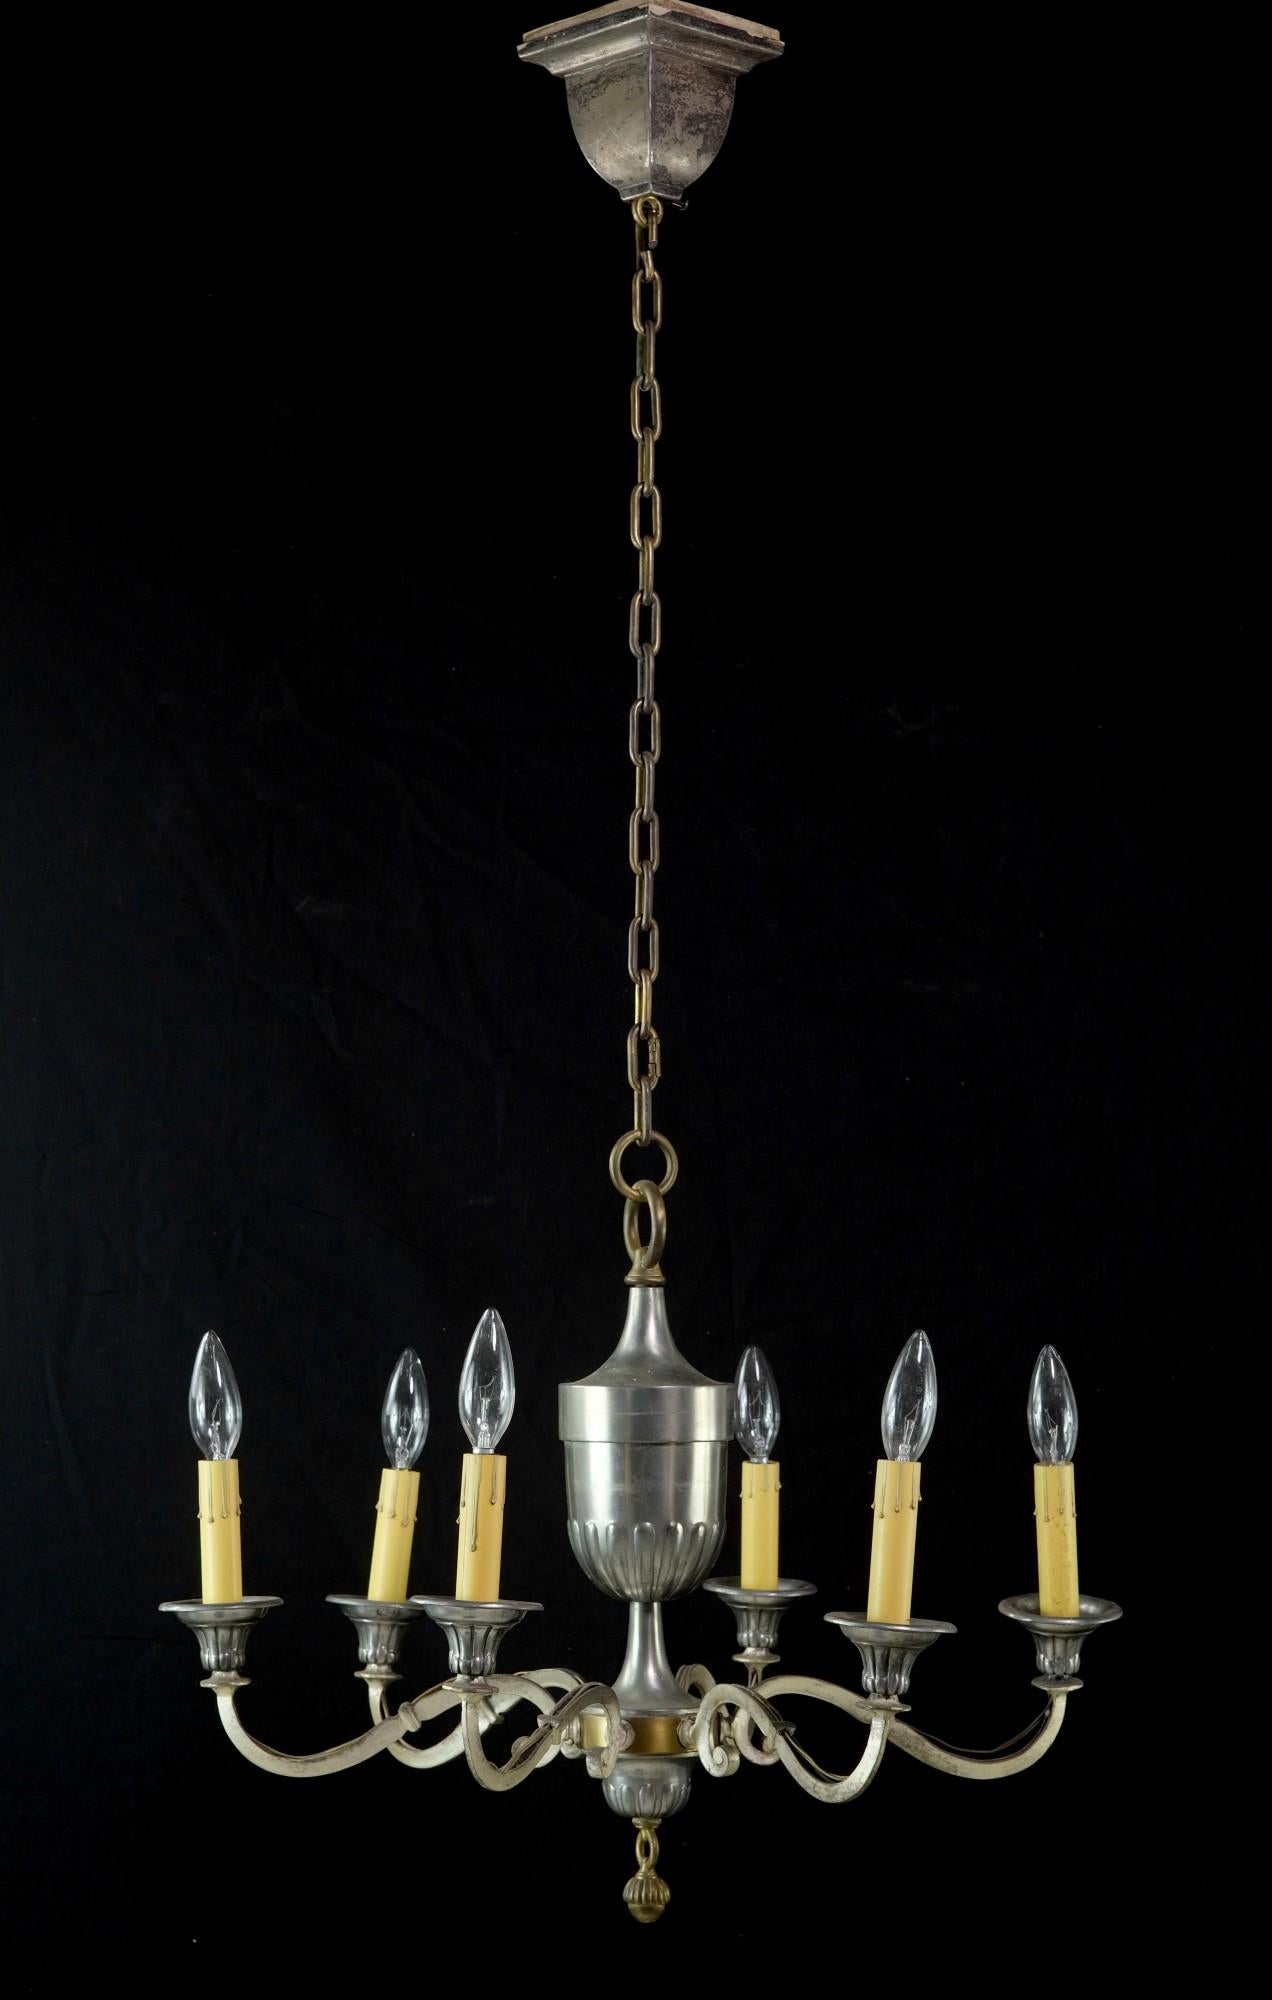 This federal style 6 light chandelier is original to the 1940's and is nickel pated over brass with the original patina. It has elegant arms surrounding an urn shaped body and features an acorn finial. The nickel plating shows some wear as seen in